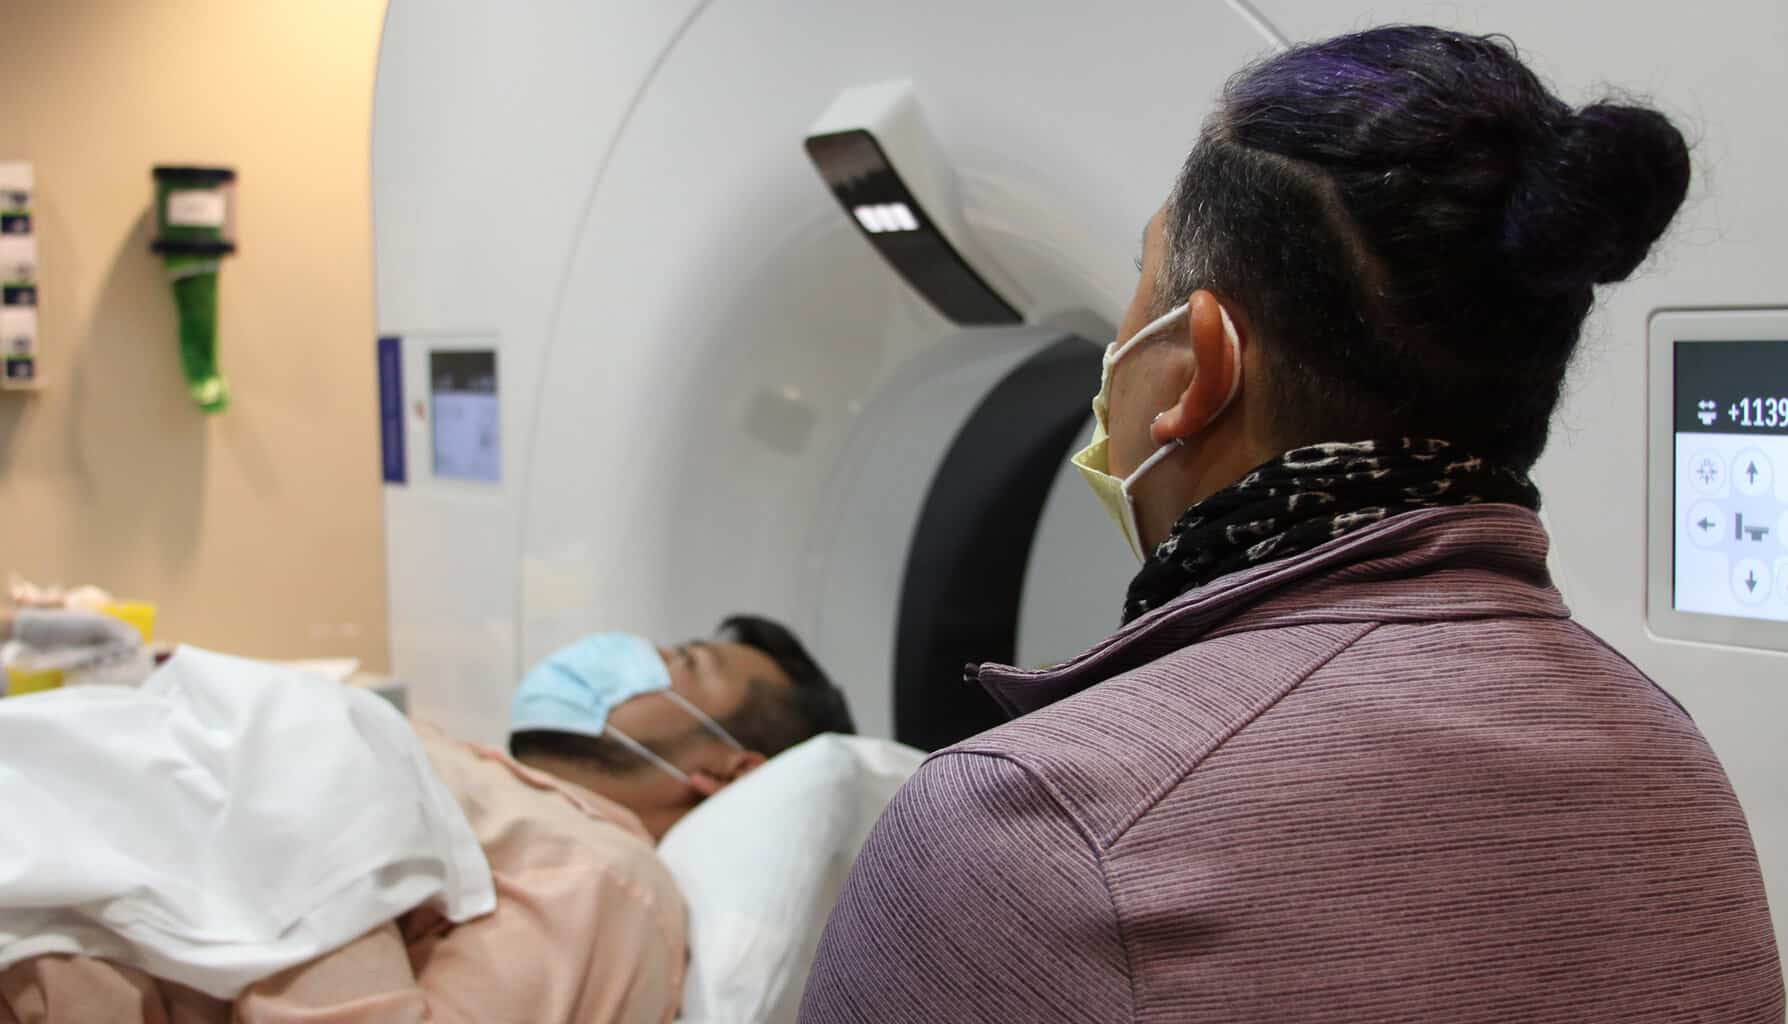 Spanish Interpreter helping translate information for patient from tech during Mri